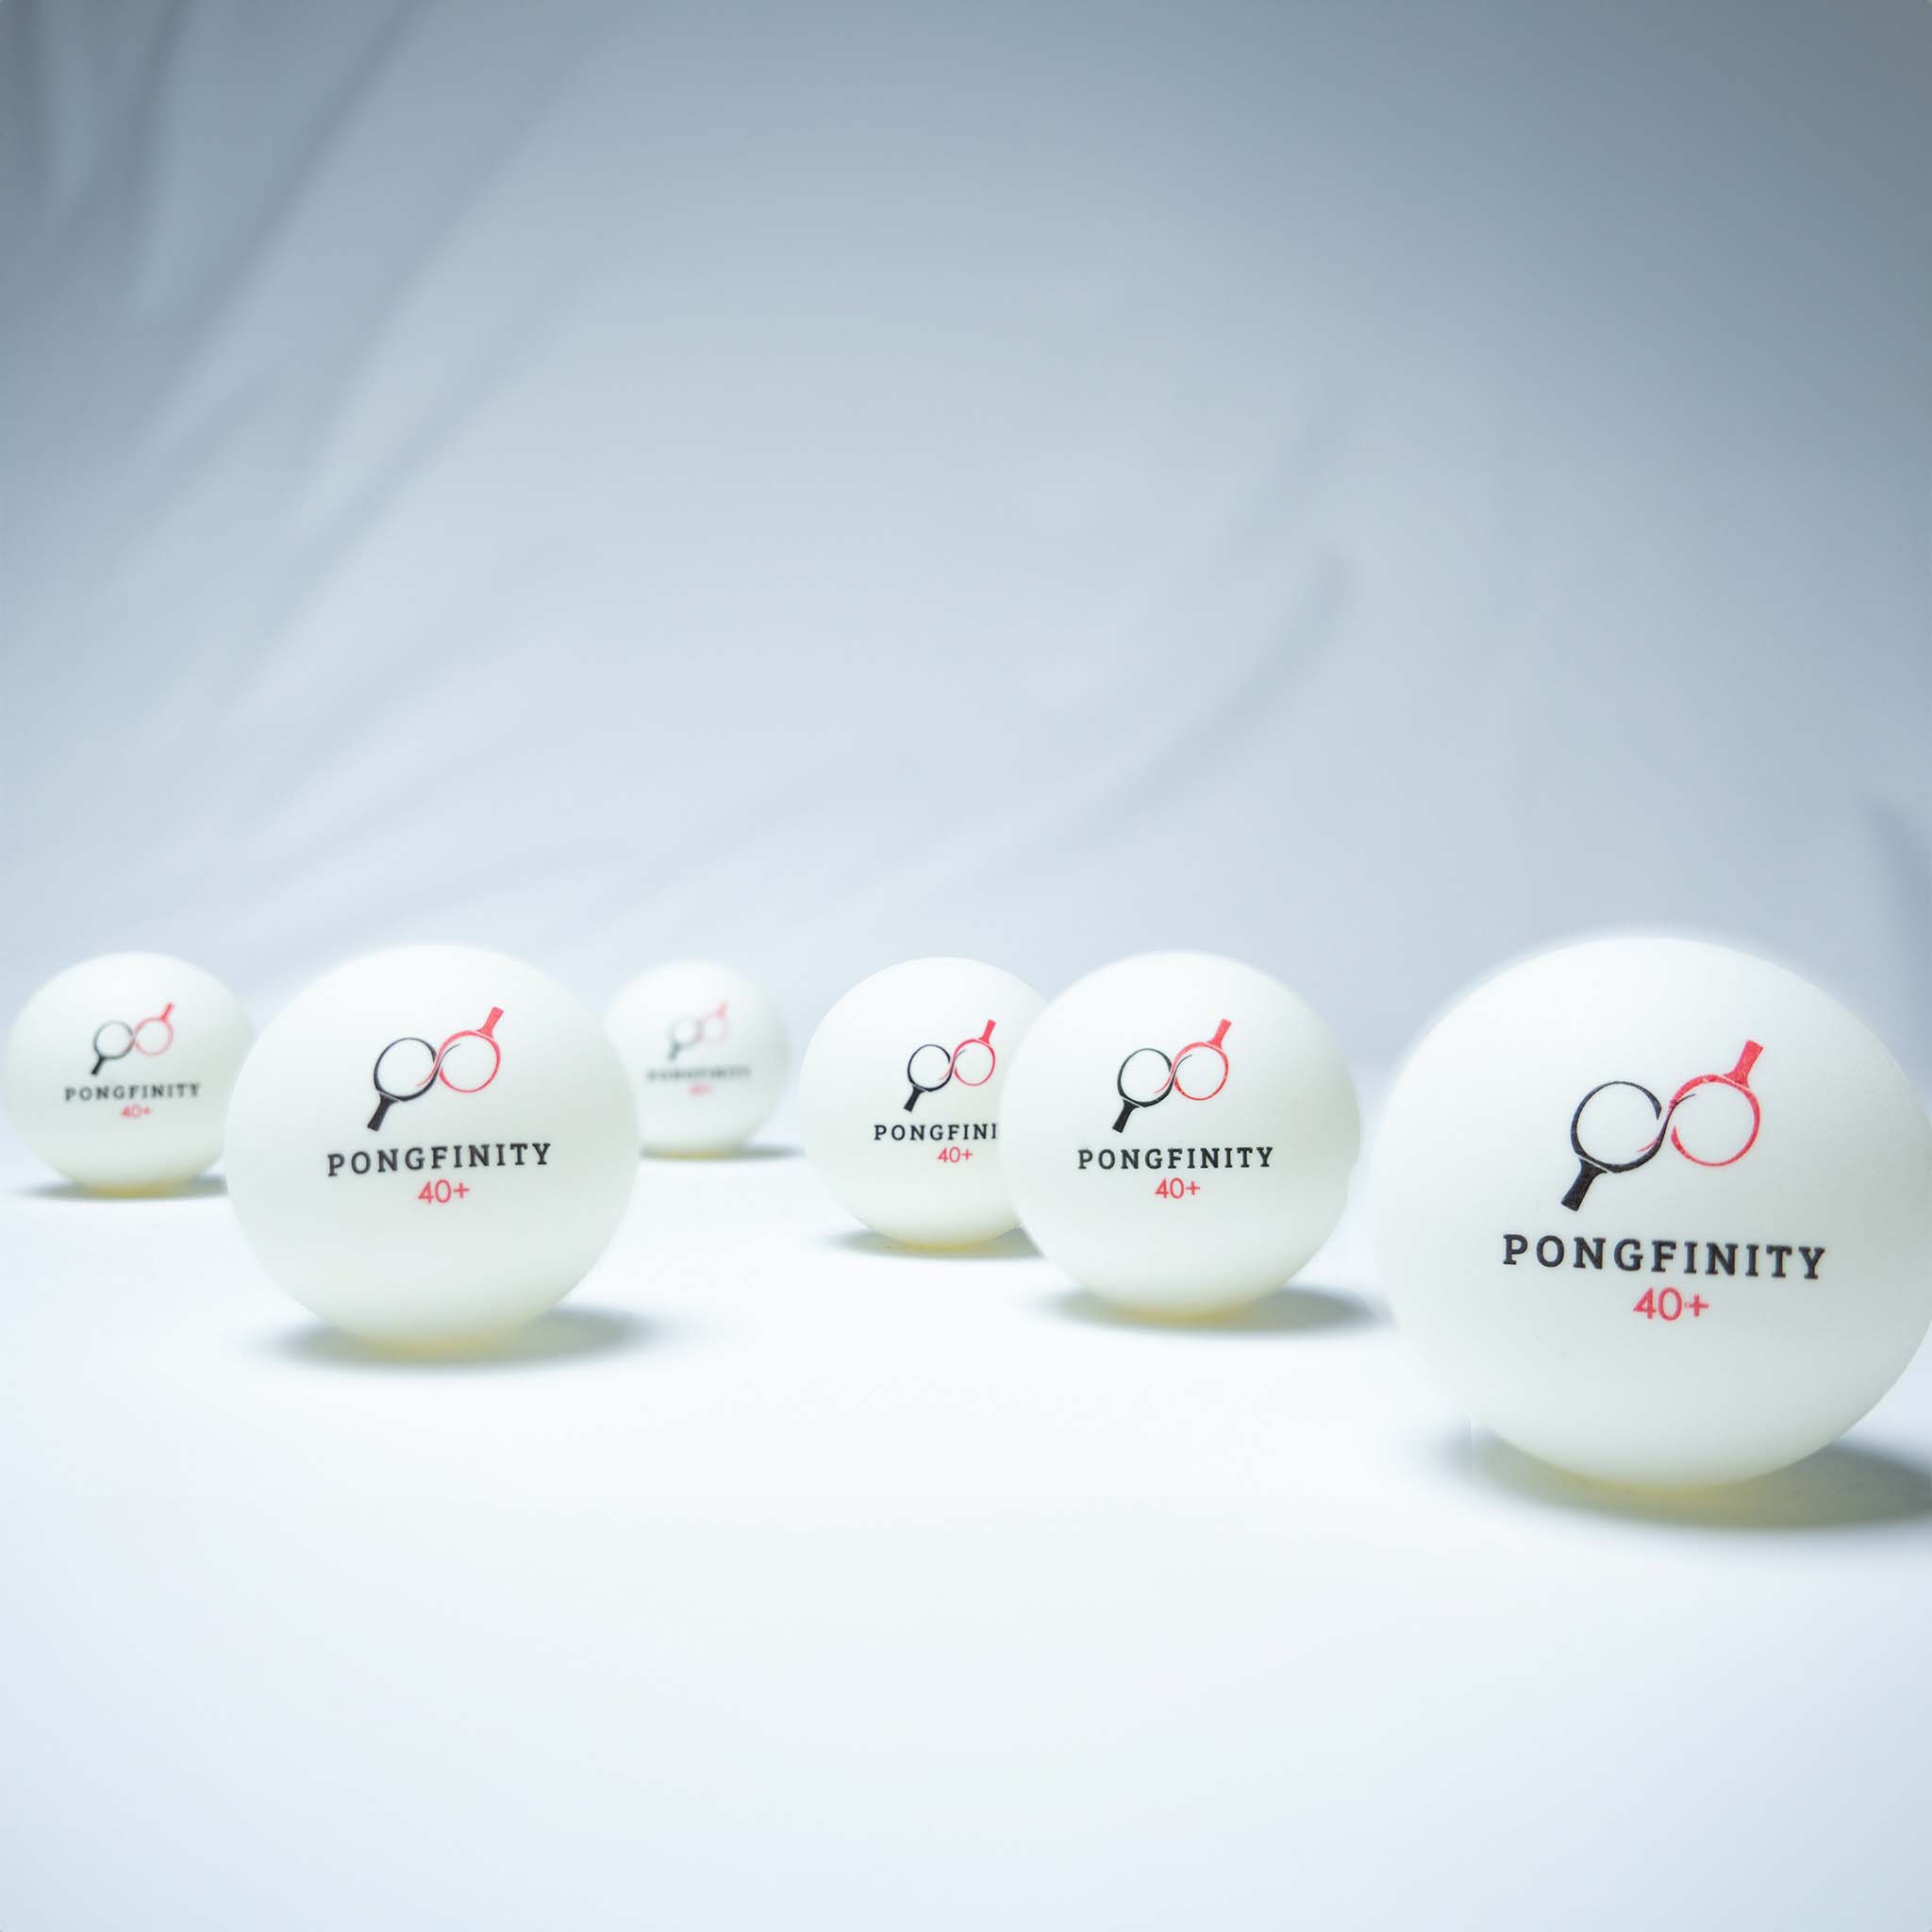 Pongfinity 6-Pack Table Tennis Balls